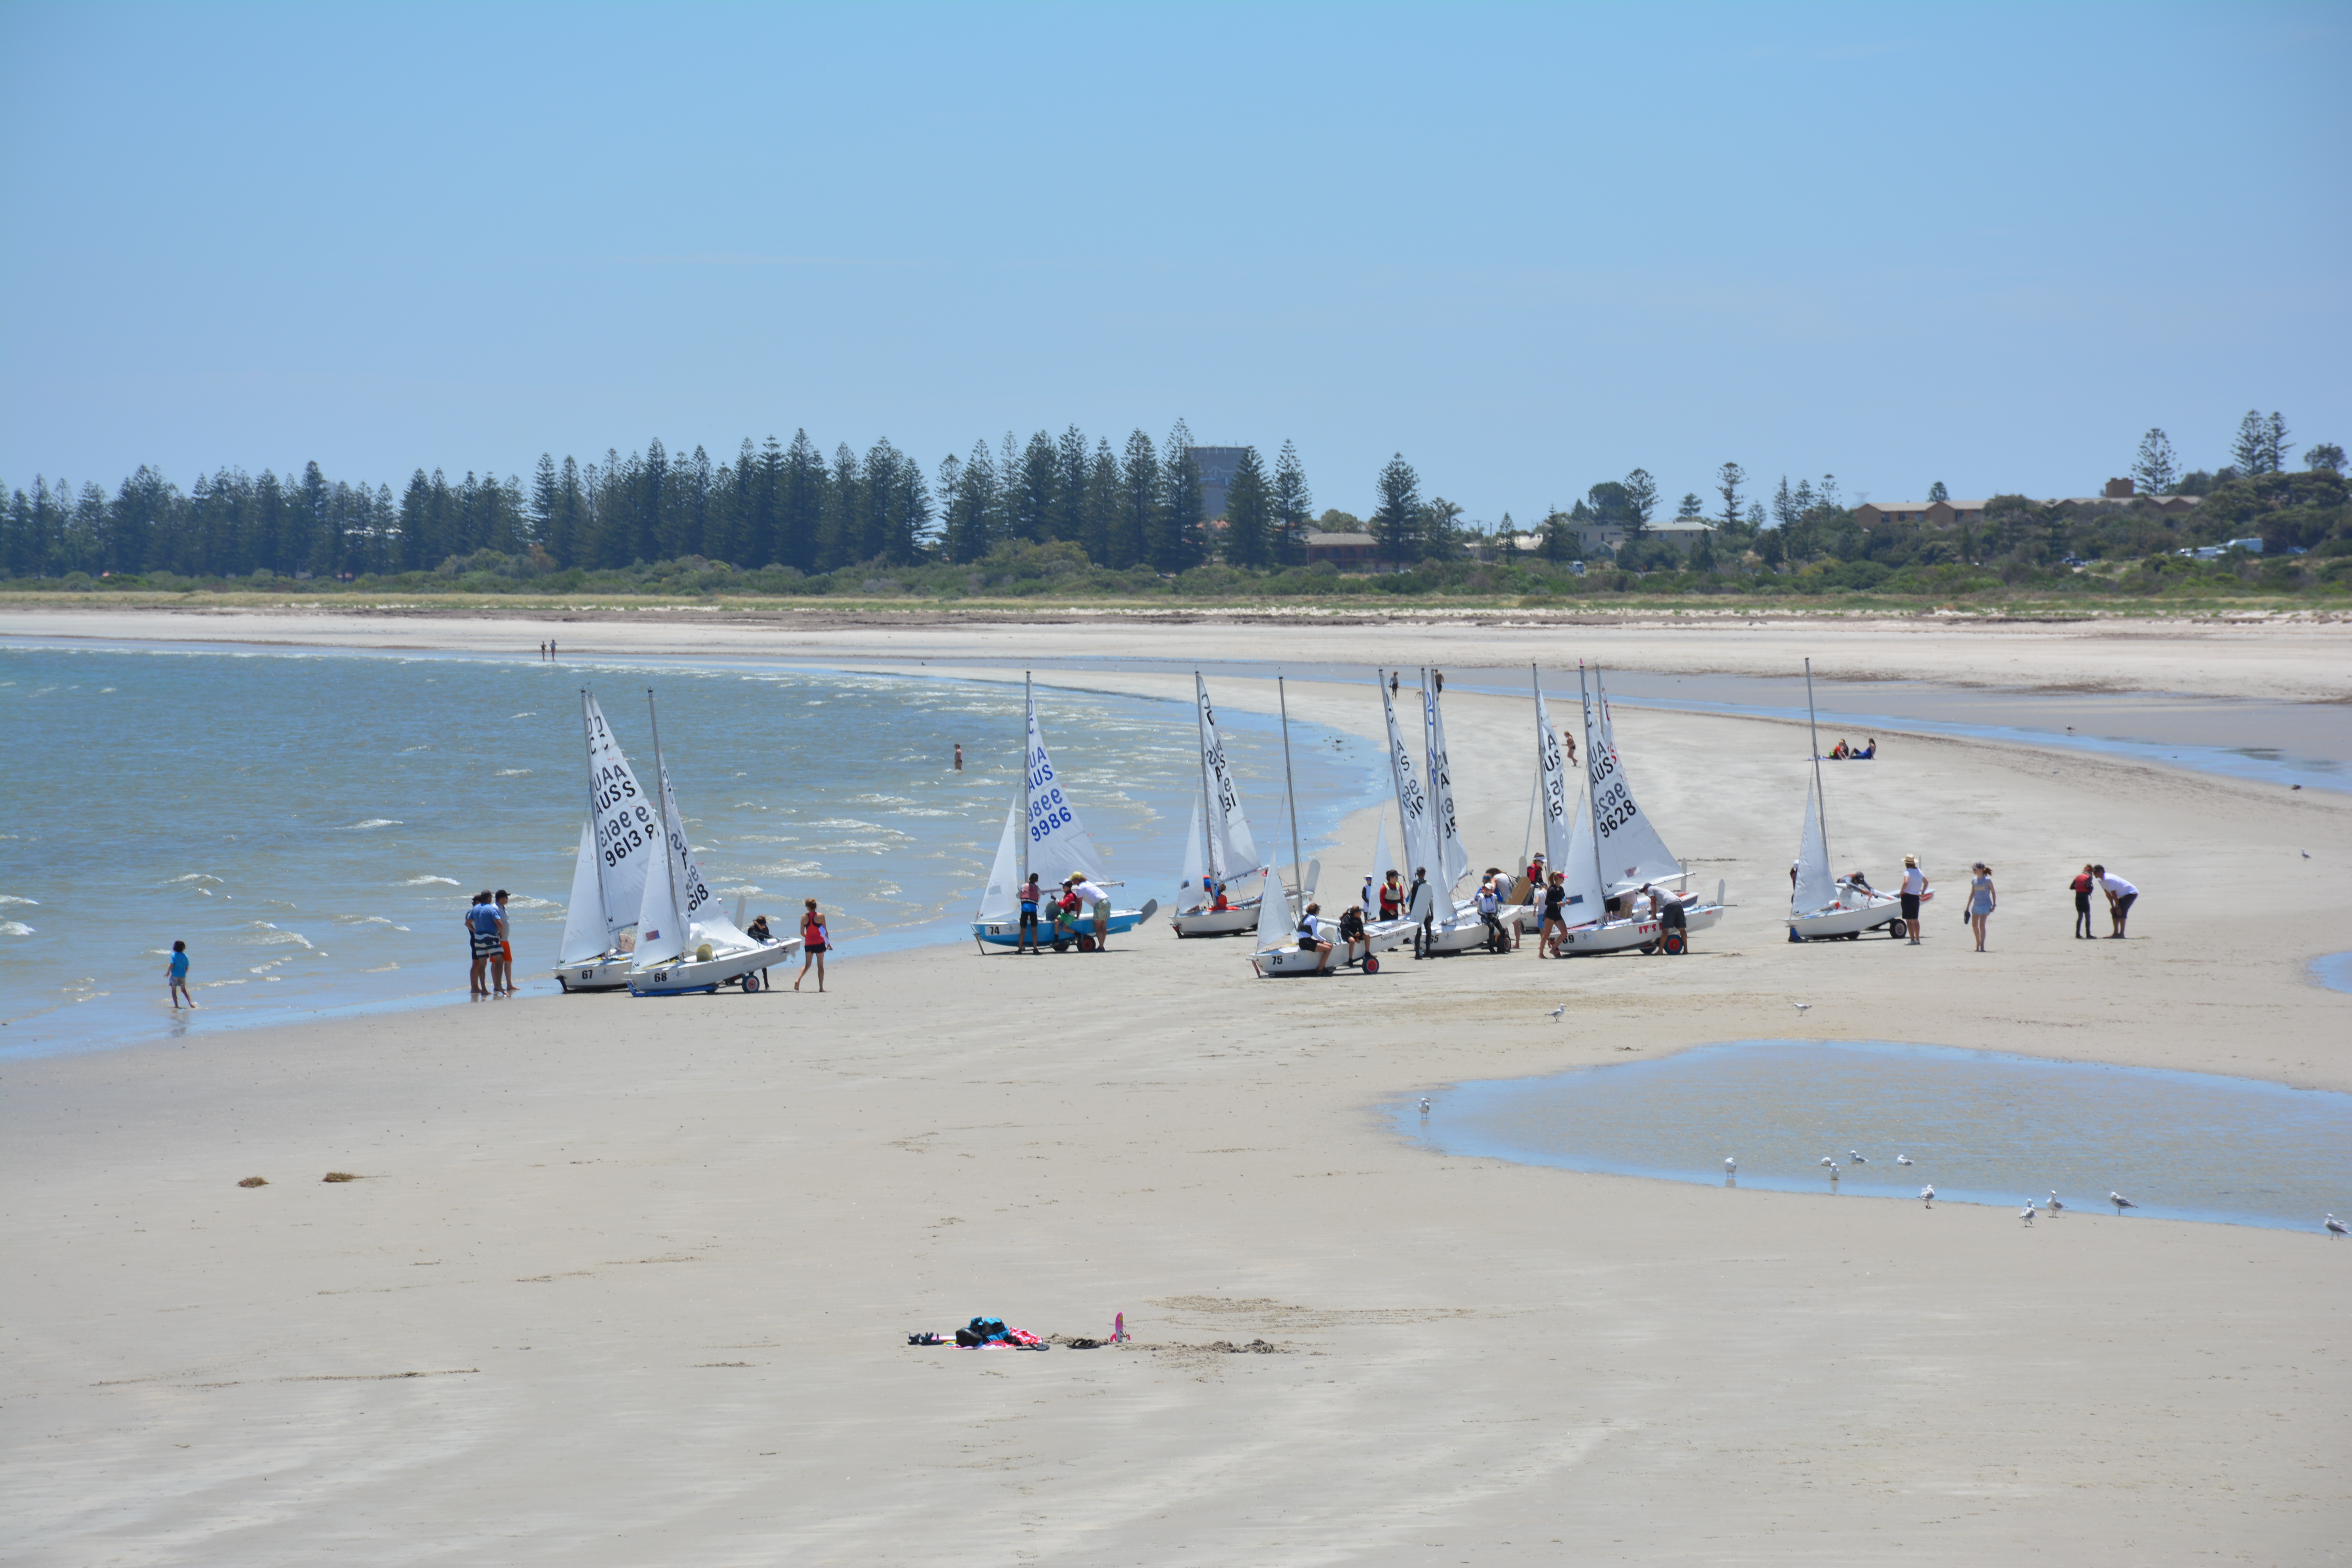 The stretch of beach at Largs Bay is perfect for hosting regattas.